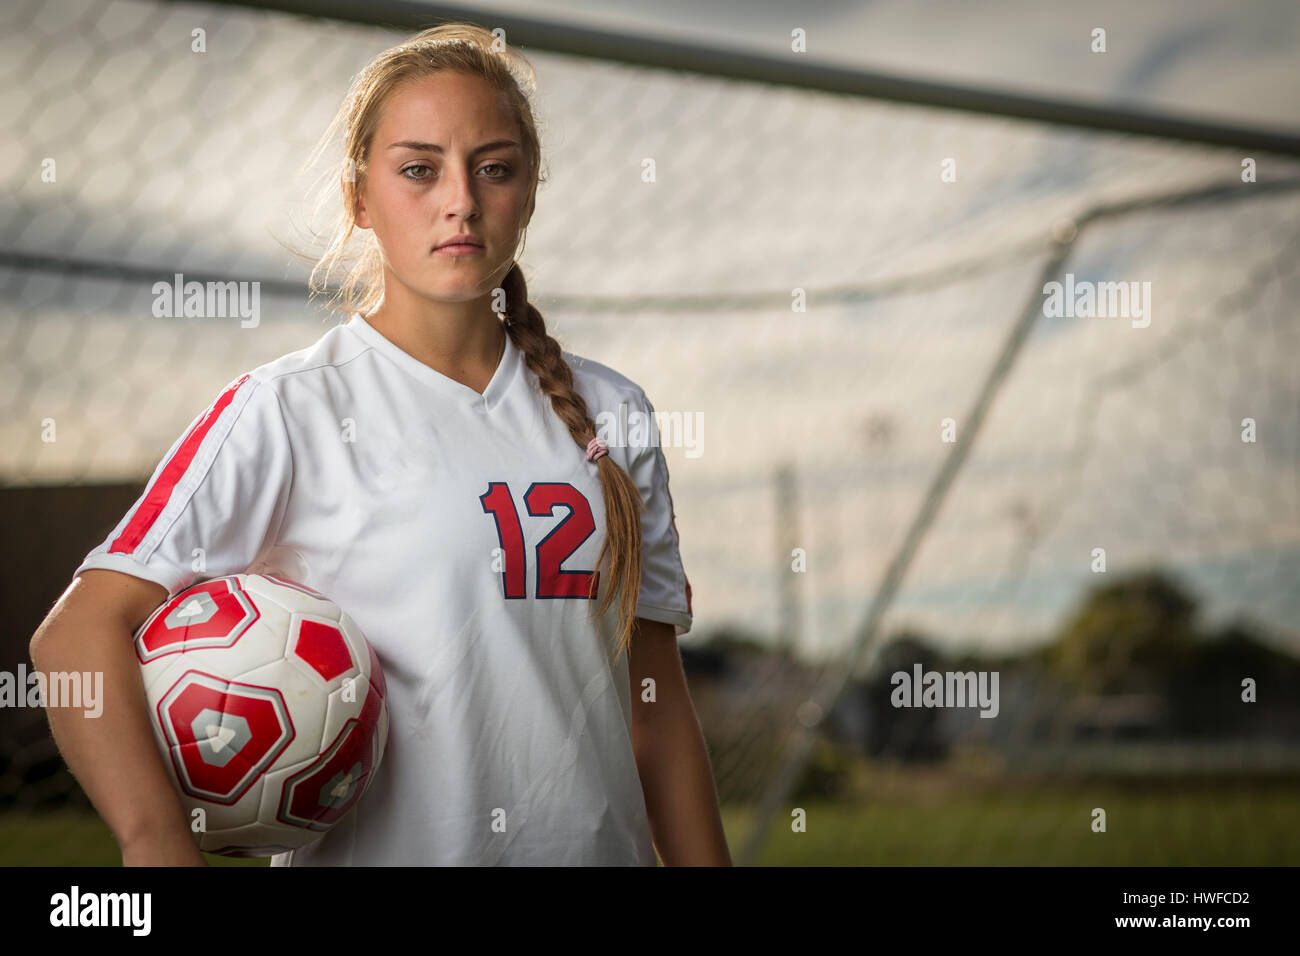 Low angle waist up portrait of serious athlete standing and holding ball in soccer goal Stock Photo